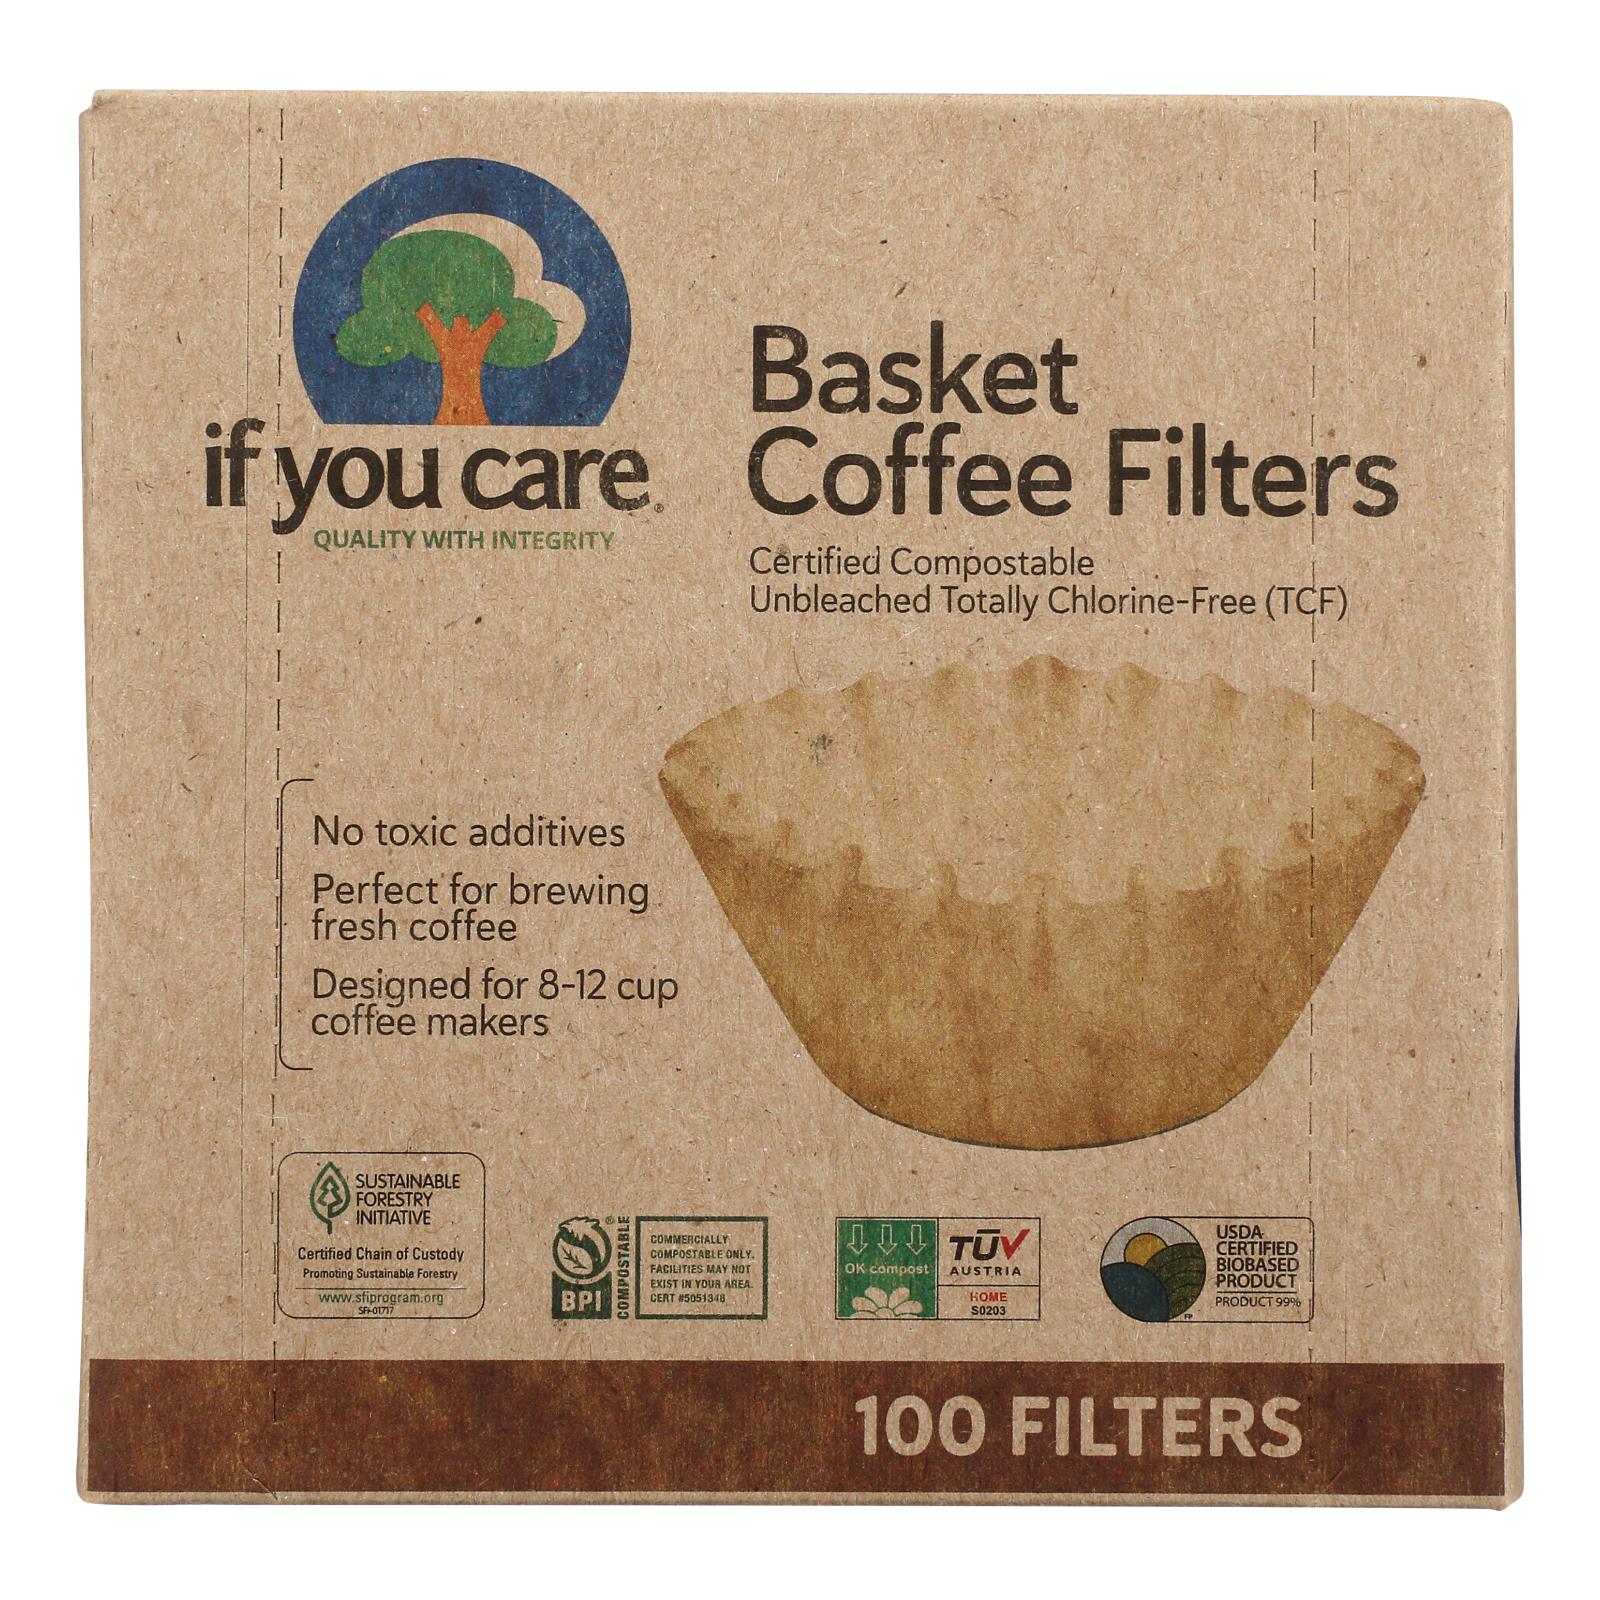 If You Care - Coffee Filter Basket - 1 Each-100 Count